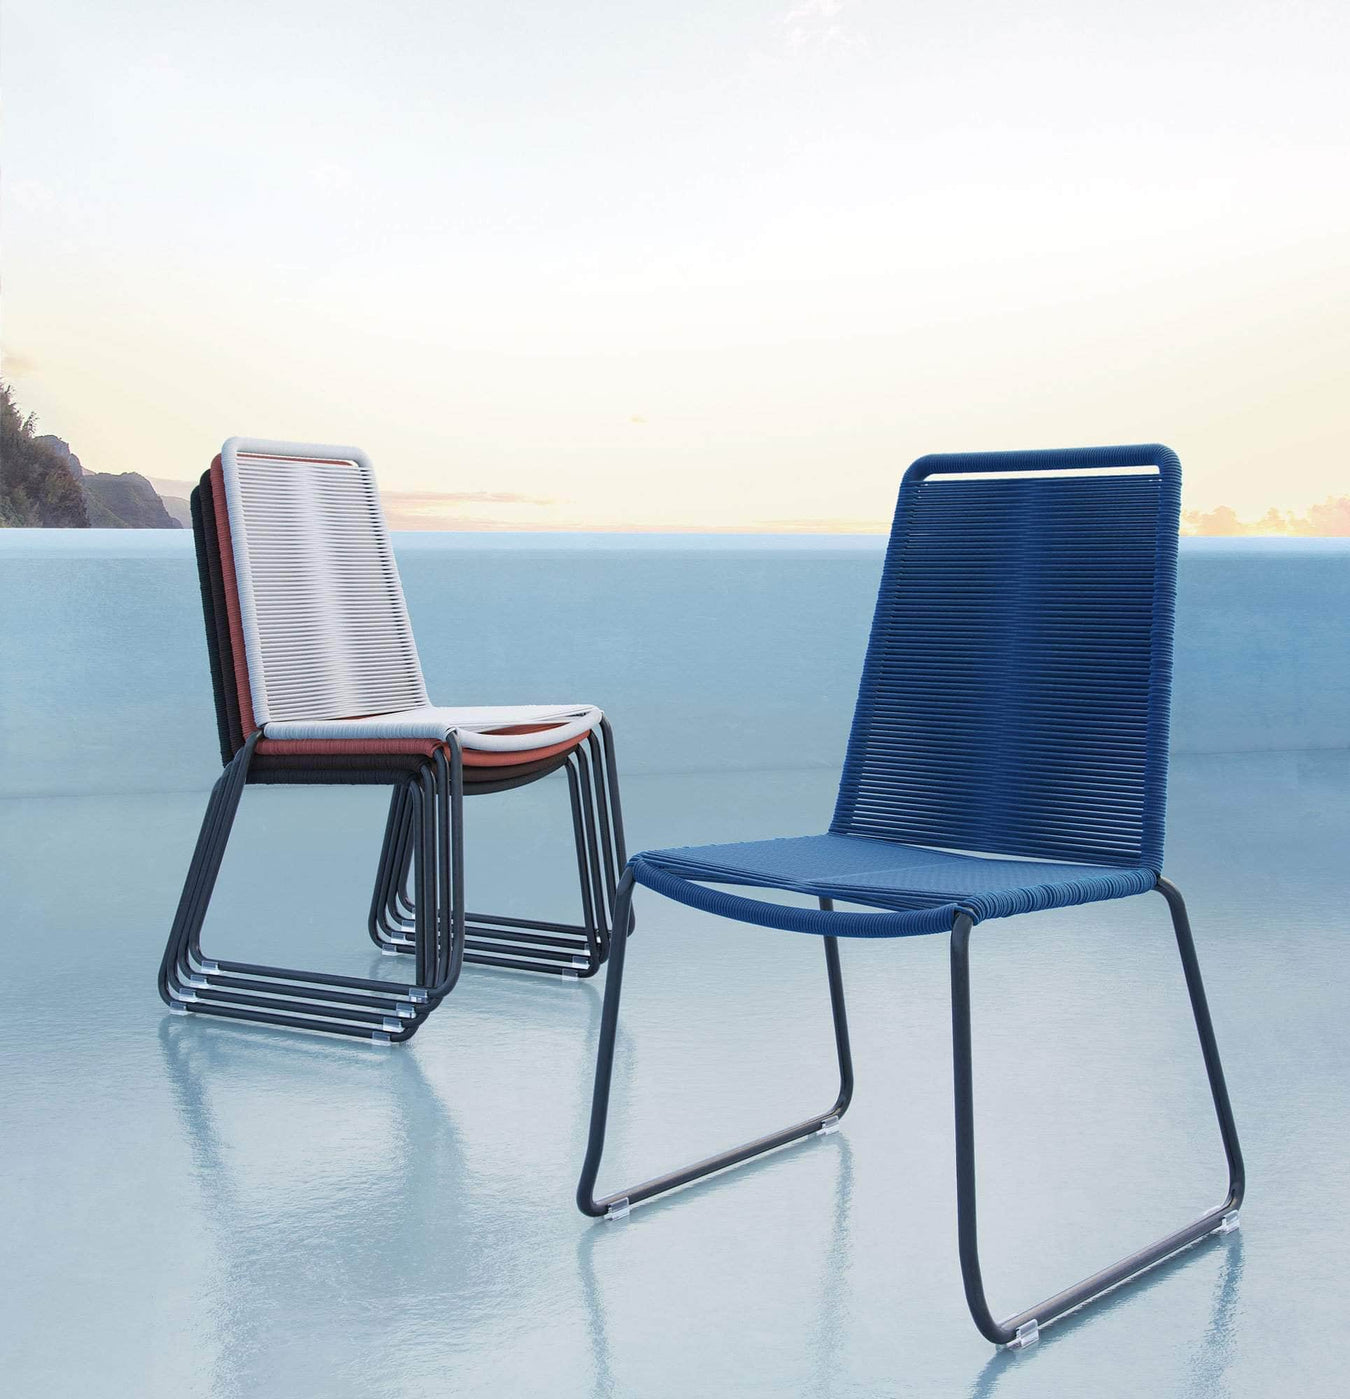 Modloft Dining Chair Barclay Stacking Dining Chair (Set of 2) - Available in 6 Colours